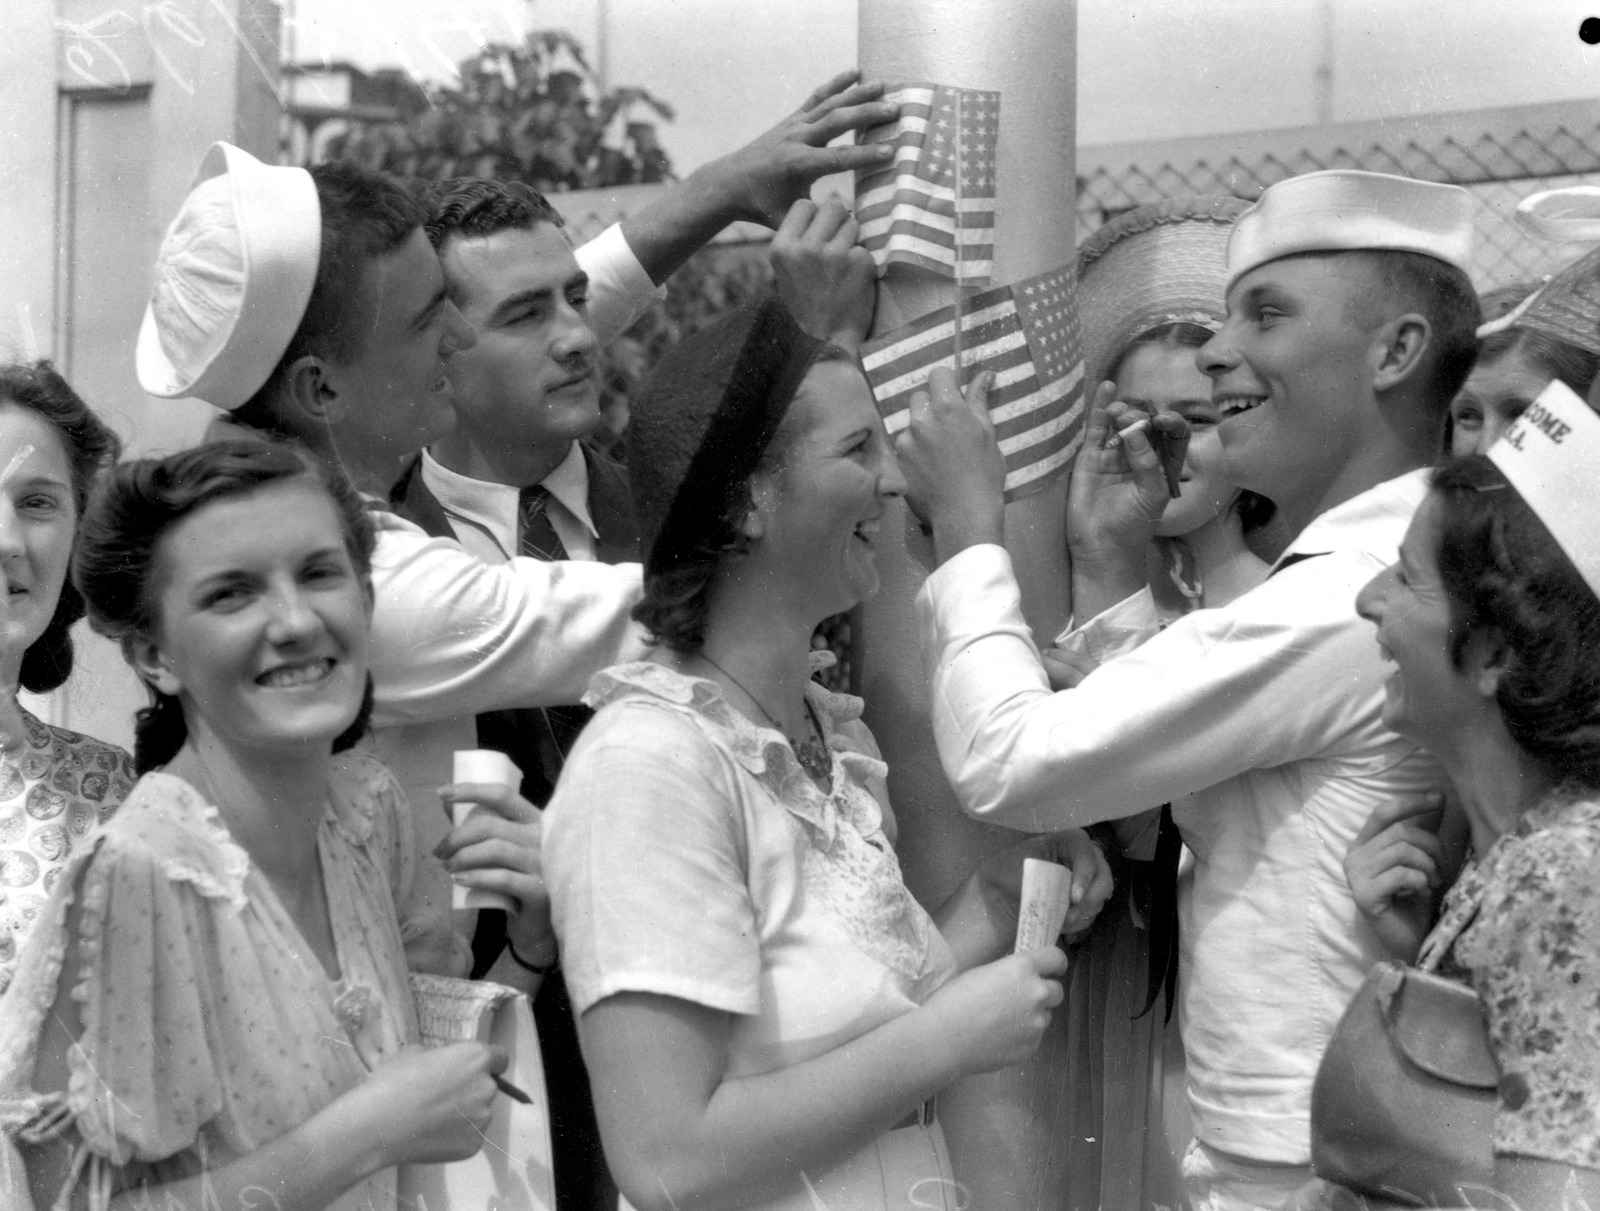 Women with Visiting American Sailors, Brisbane, Queensland, 1941, John Oxley Library, State Library of Queensland, negative no. 104176. 